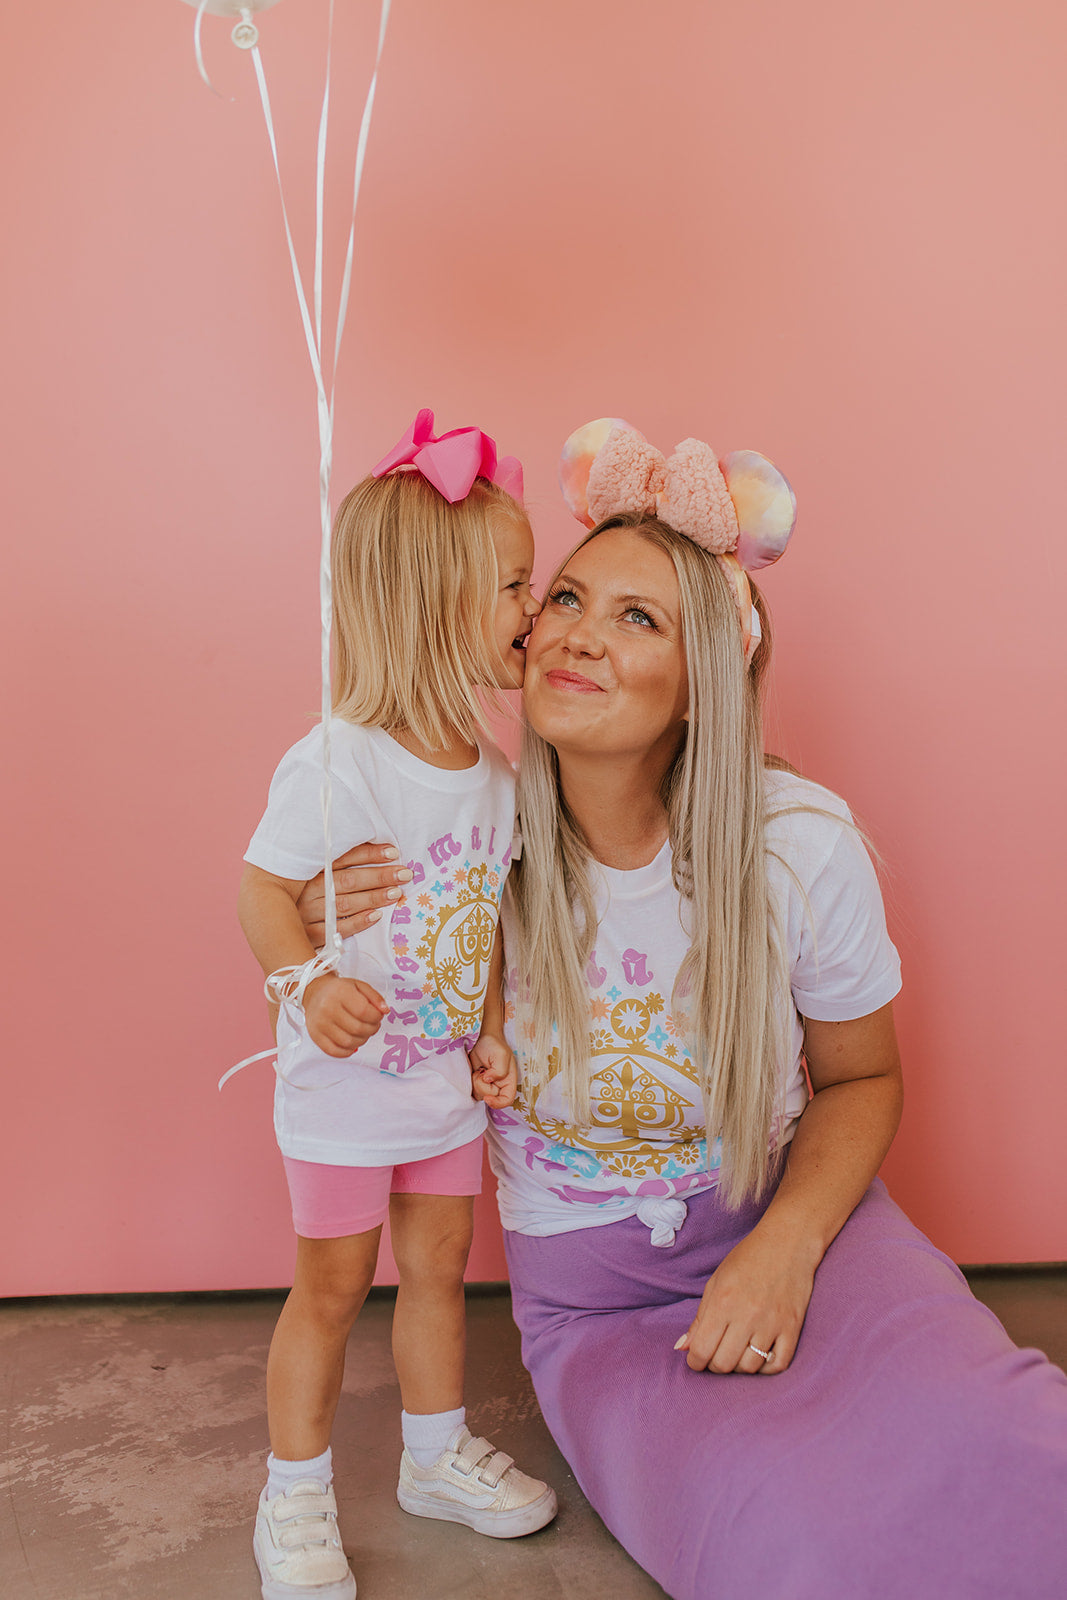 THE SMALL WORLD IN COLOR KIDS TEE BY HAPPY THREADS X PINK DESERT